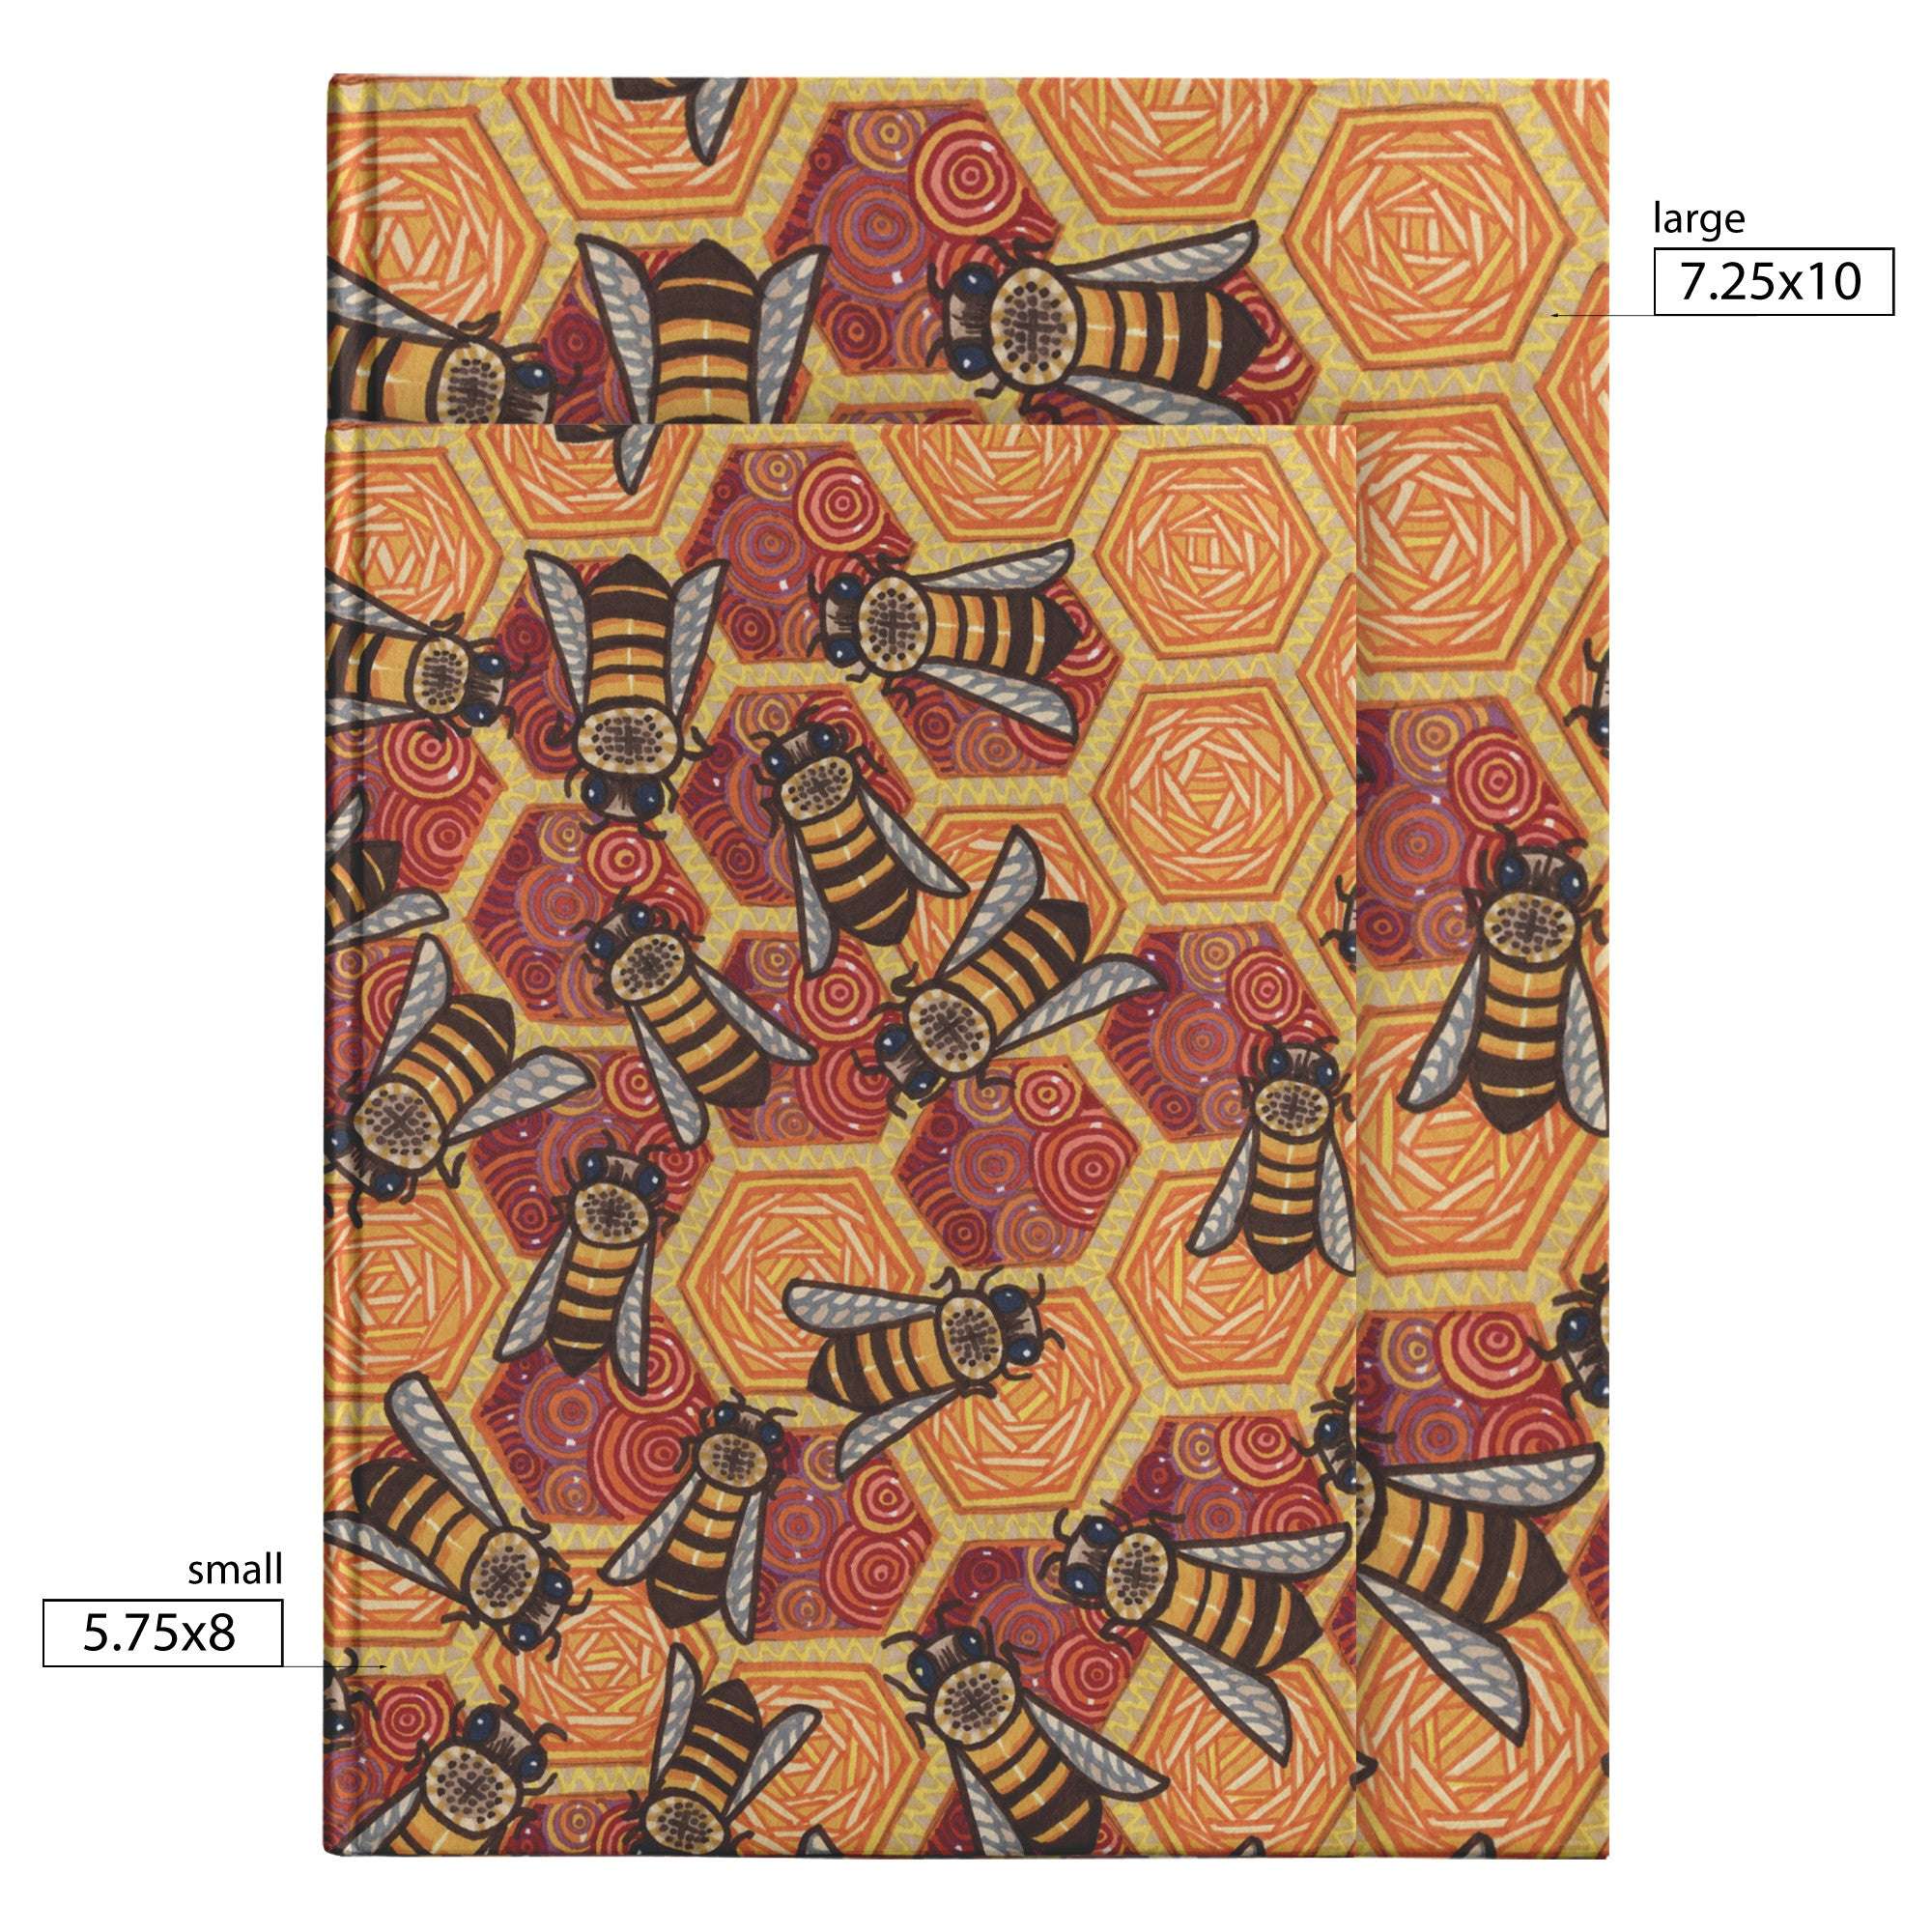 Honeycomb Harmony Journal with bee designs and geometric shapes in warm tones, available in two sizes: large (7.25x10) and small (5.75x8).